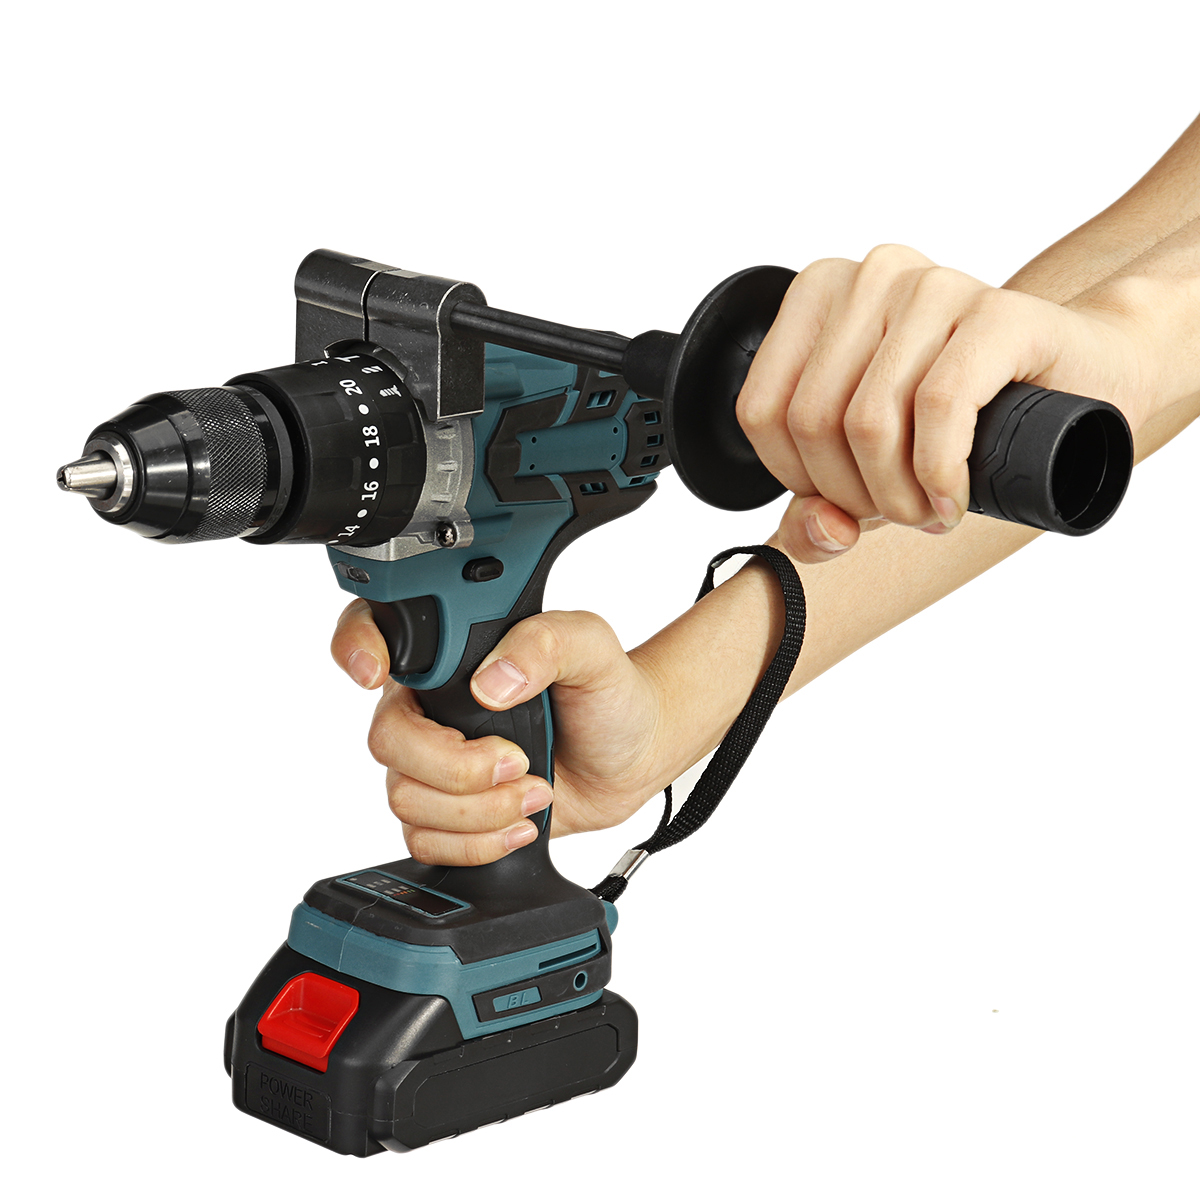 Cordless-Electric-Impact-Drill-3-in-1-Rechargeable-Drill-Screwdriver-13mm-Chuck-W-1-or-2-Li-ion-Batt-1803323-14